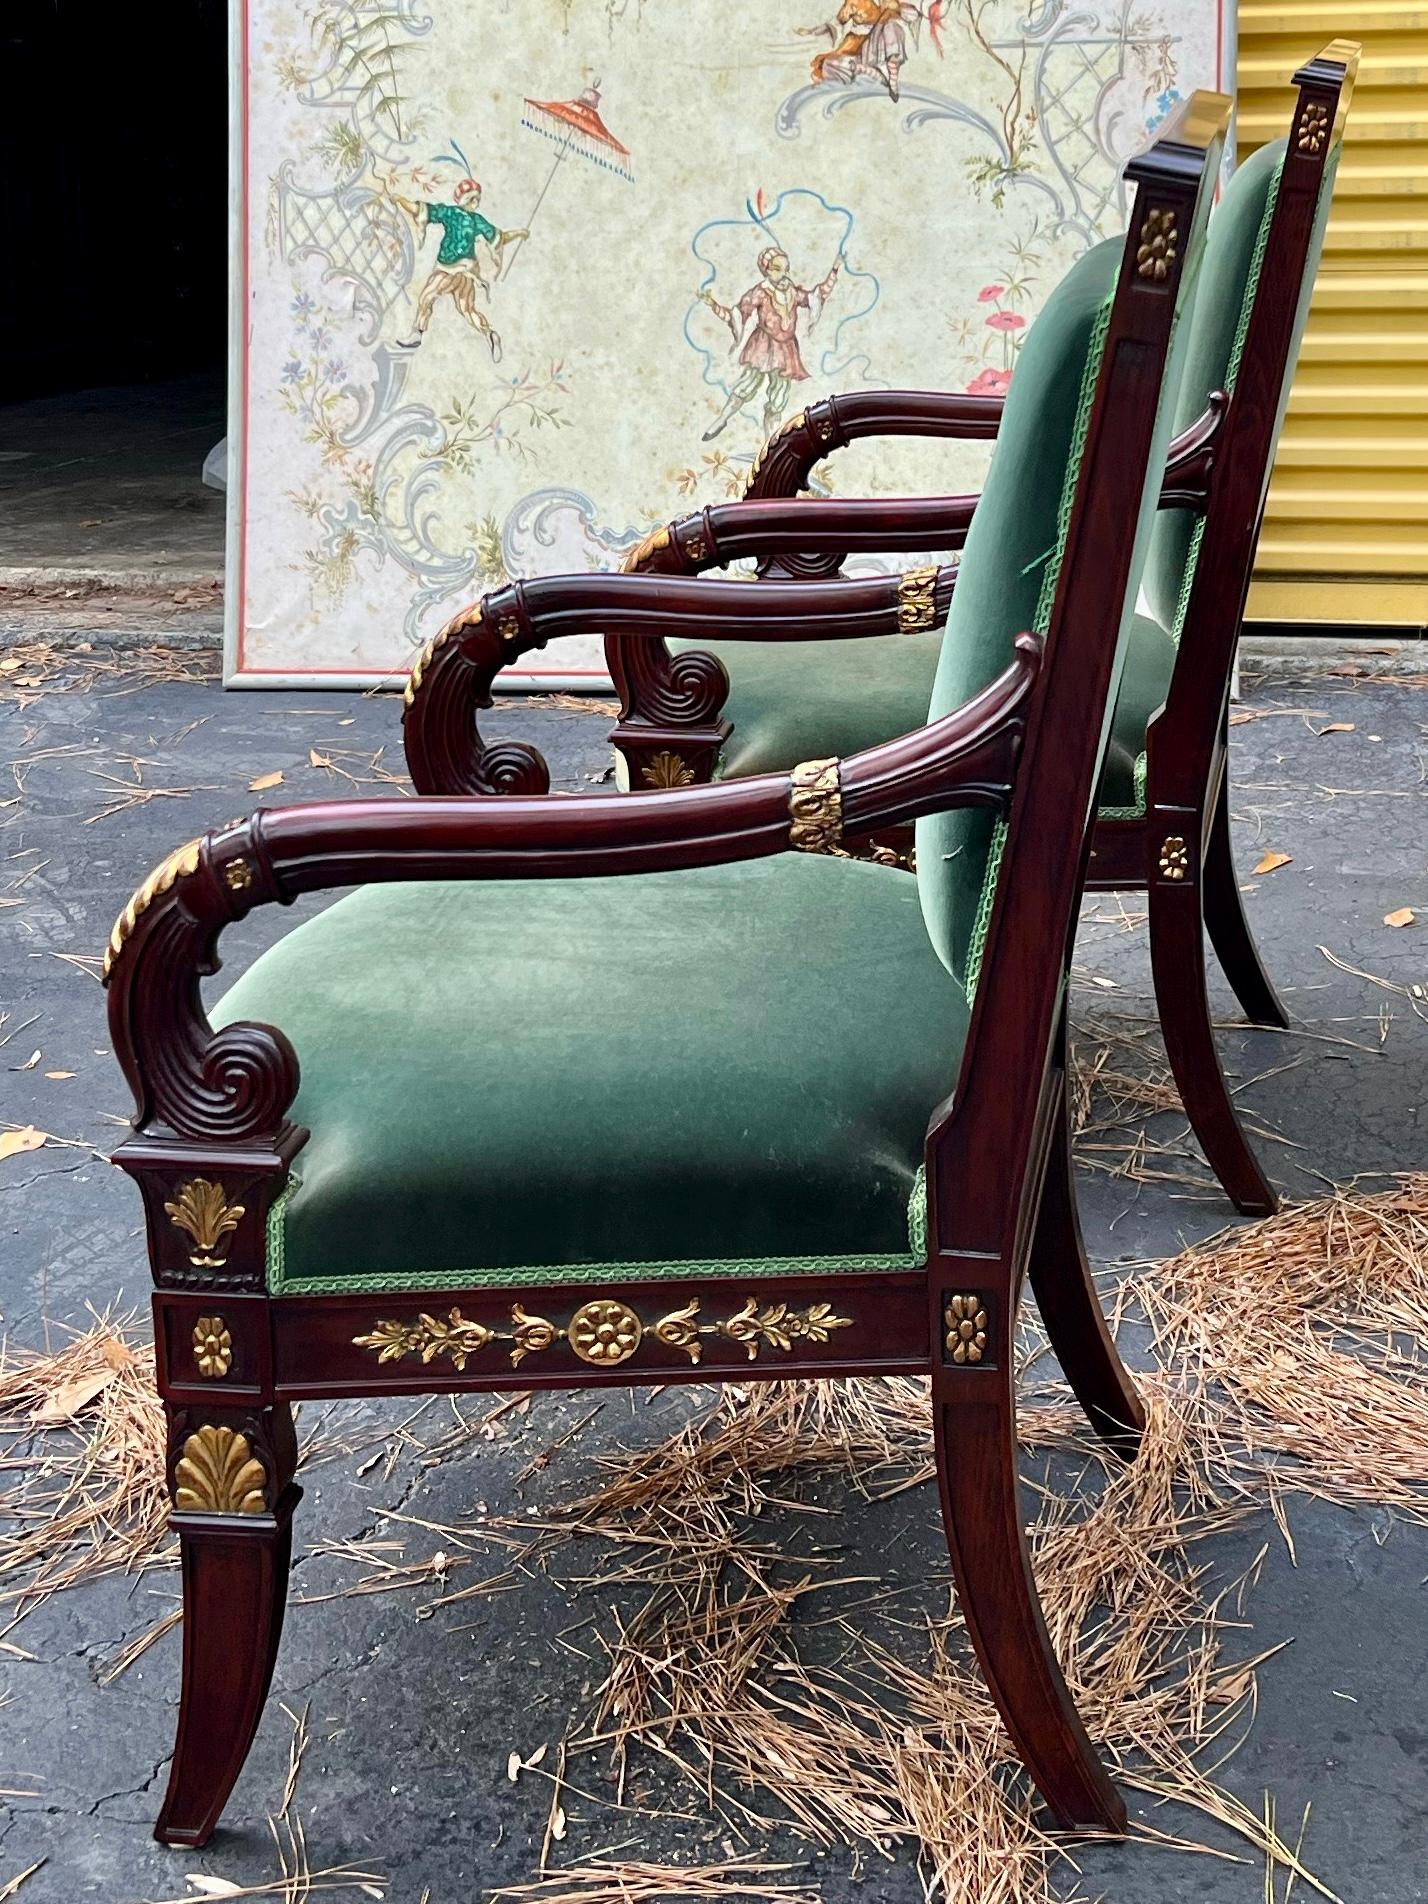 20th Century 20th-C. Fruitwood and Giltwood Italian Bergere Chairs in Green Velvet, Pair For Sale